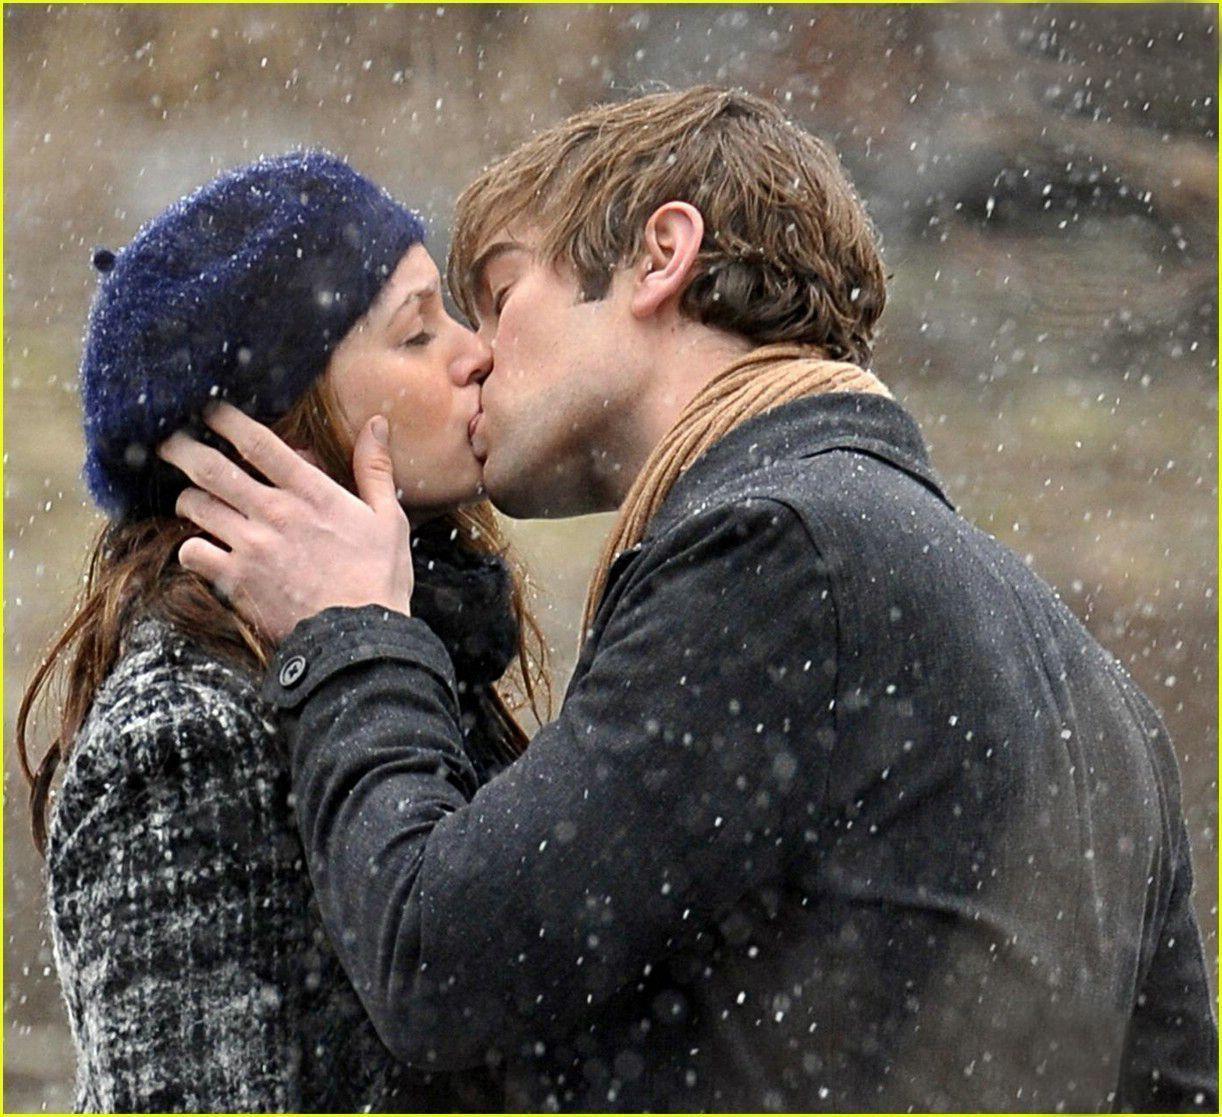 Romantic Couple Kissing Hd Wallpaper Day Wishes